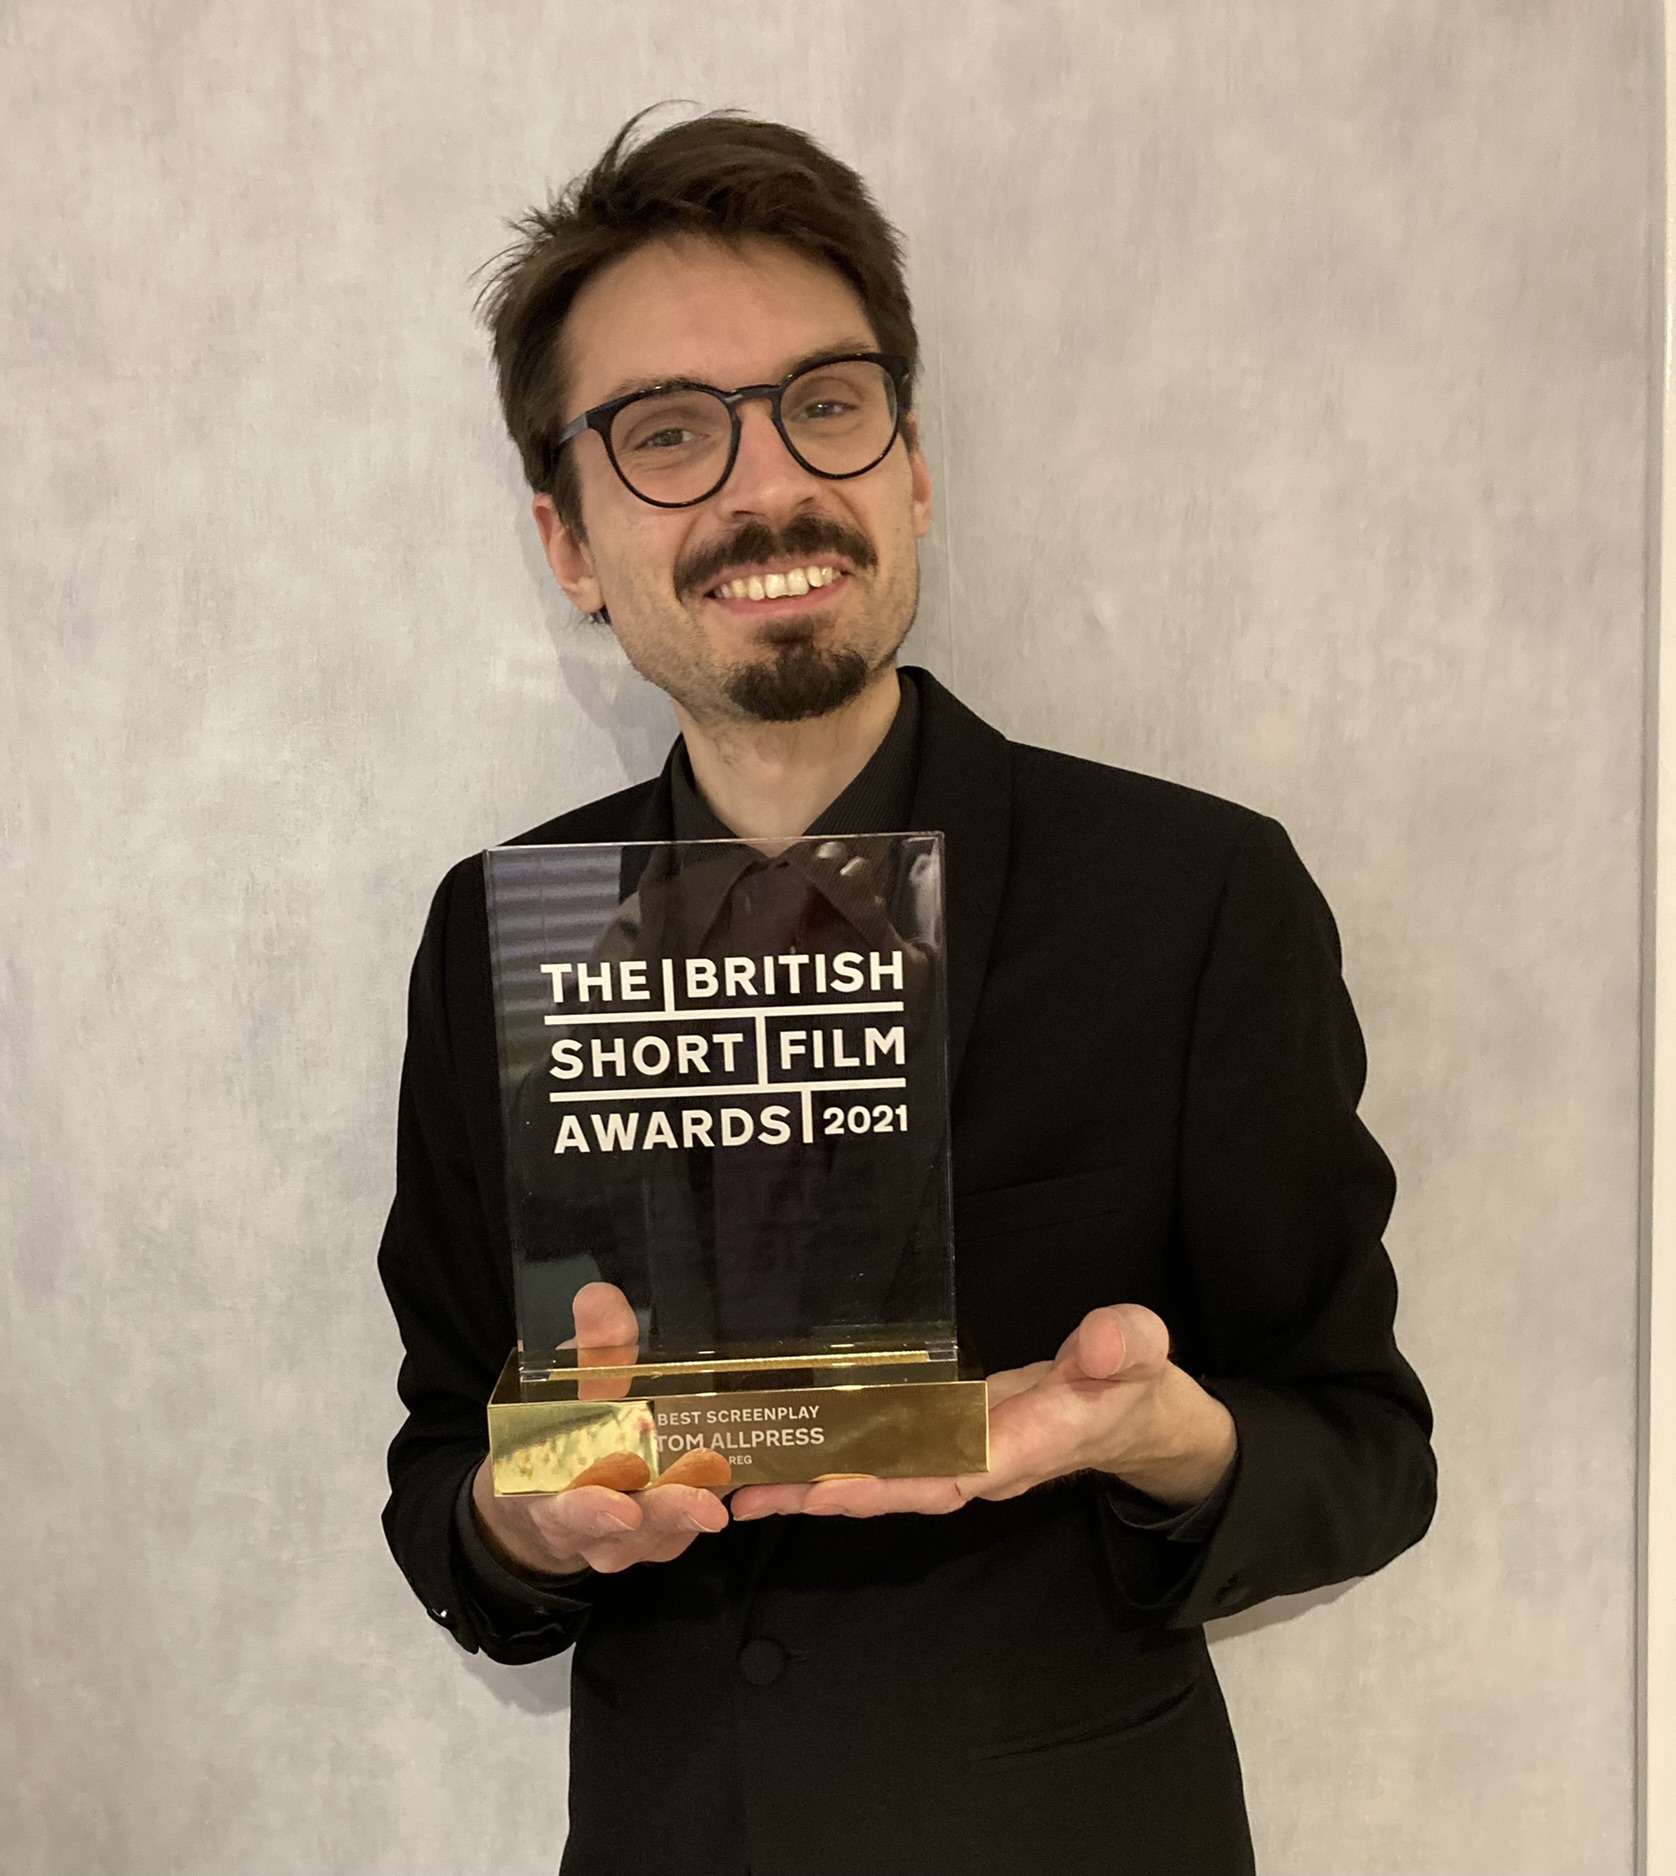 Thomas smiling, holding his Best Screenplay award from the British Short Film Awards. The backdrop is a textured wall.